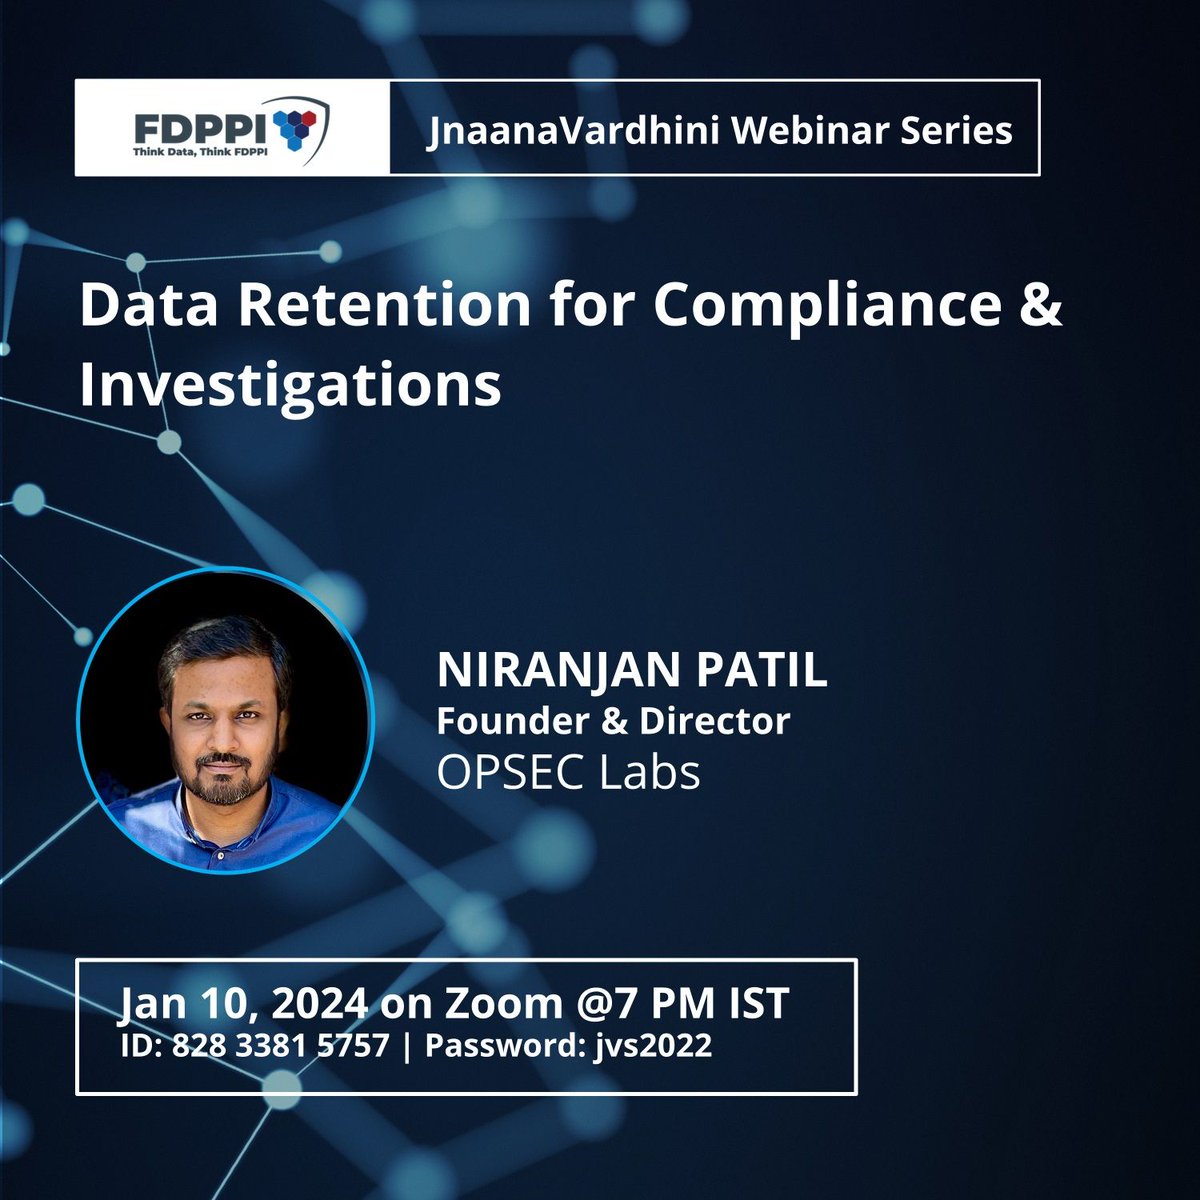 I’ll be speaking at @FDPPI1 #JnaanaVardhini Series on Data Retention for Compliance & investigations. Do join in.
linkedin.com/posts/foundati…
#dataretention #compliance #dataprotection #privacy #fdppi